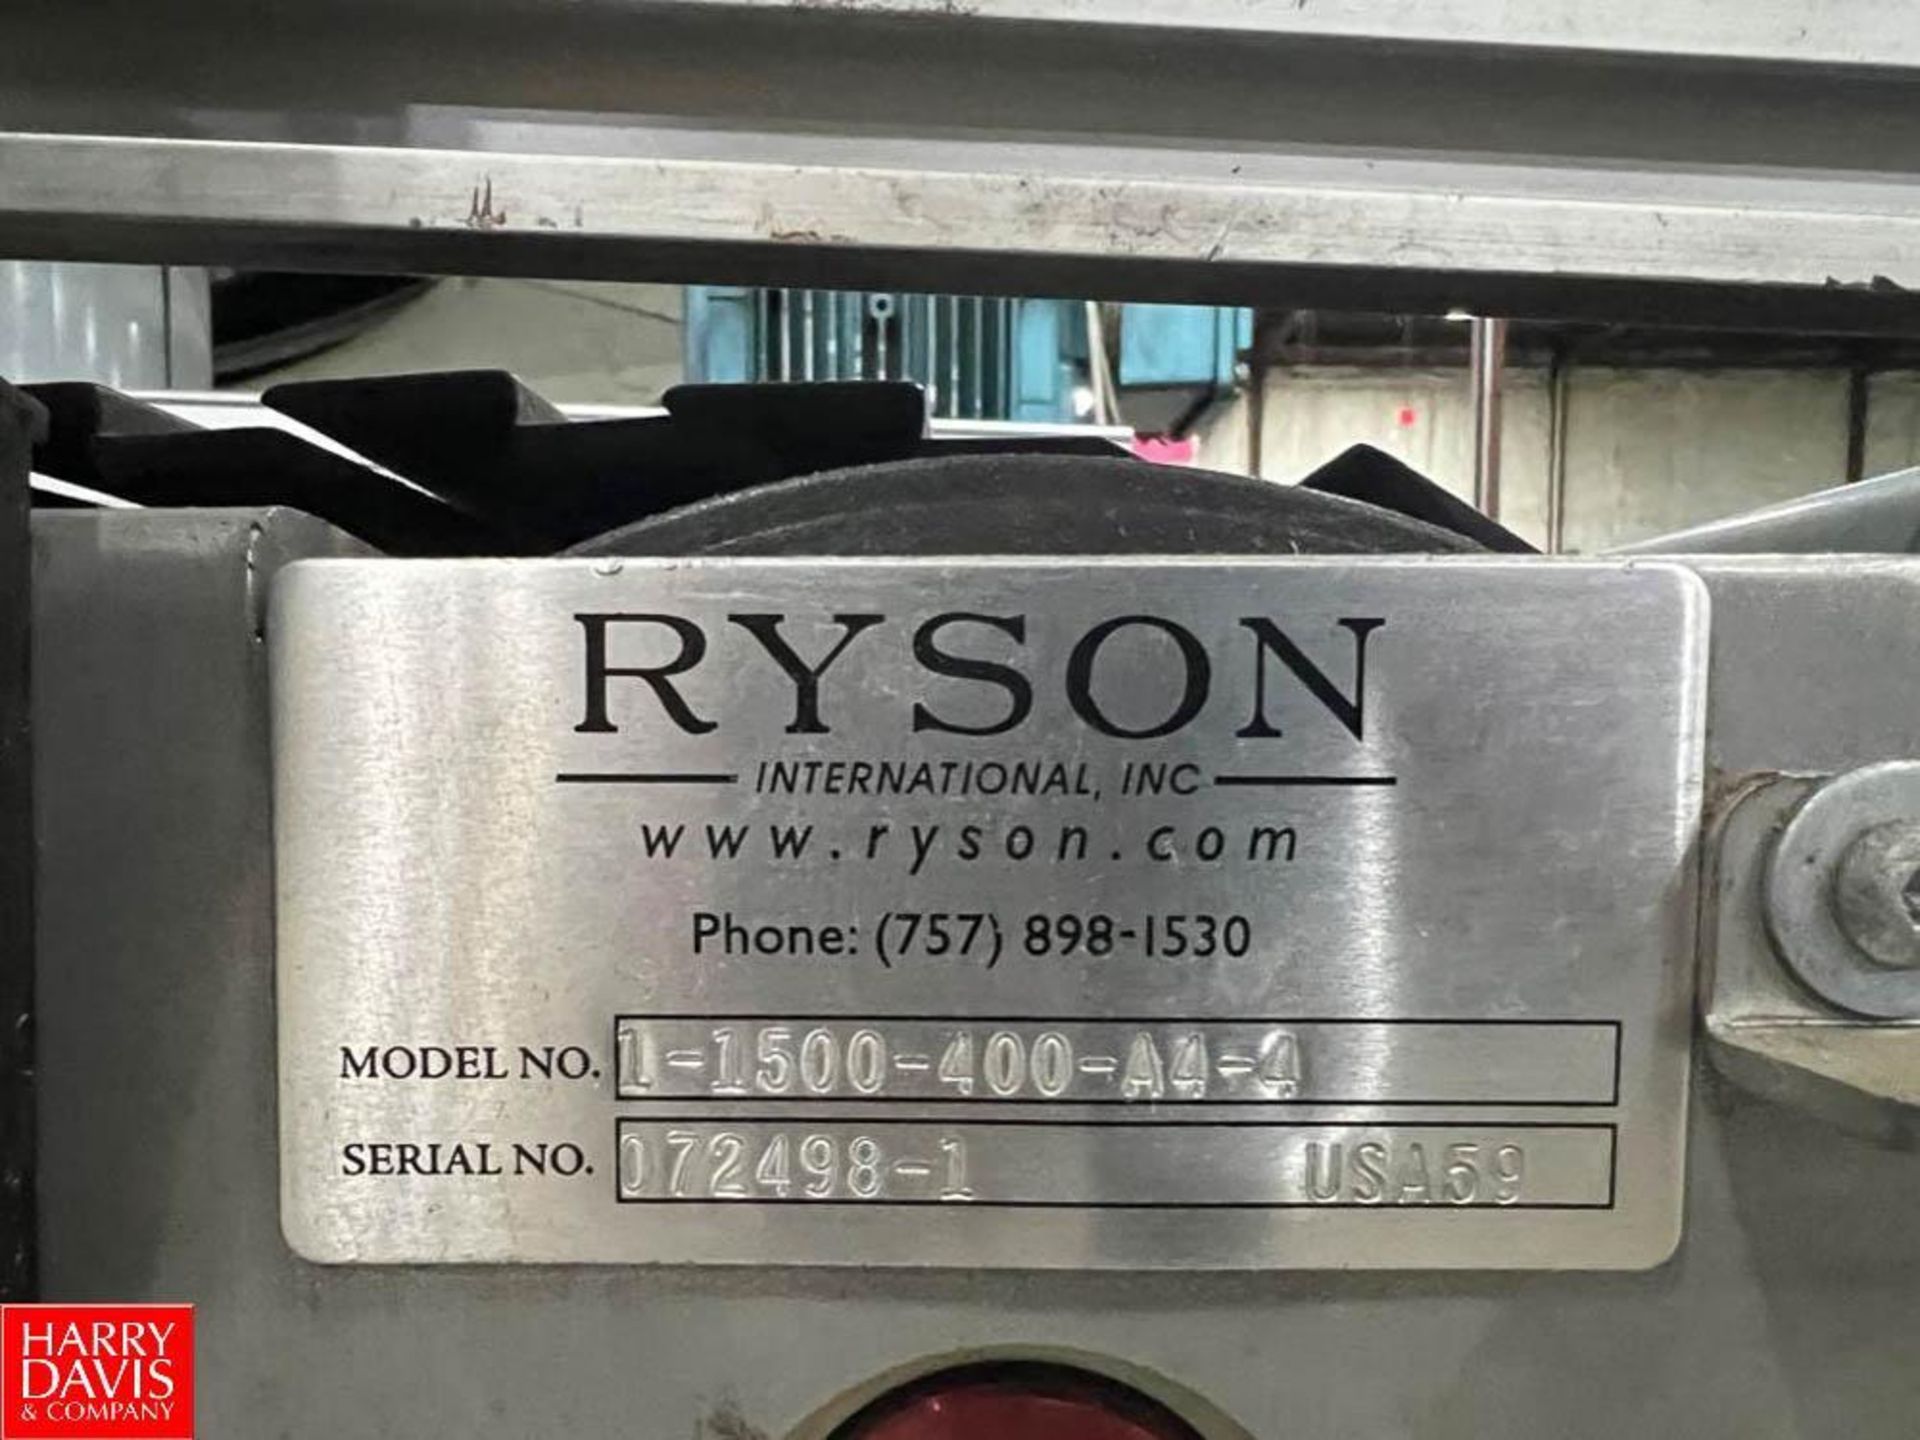 Ryson Spiral Elevator Conveyor, Model: 1-1500-400-A4-4, S/N: 072498-1, Dimensions = 16" Width - Rigg - Image 3 of 3